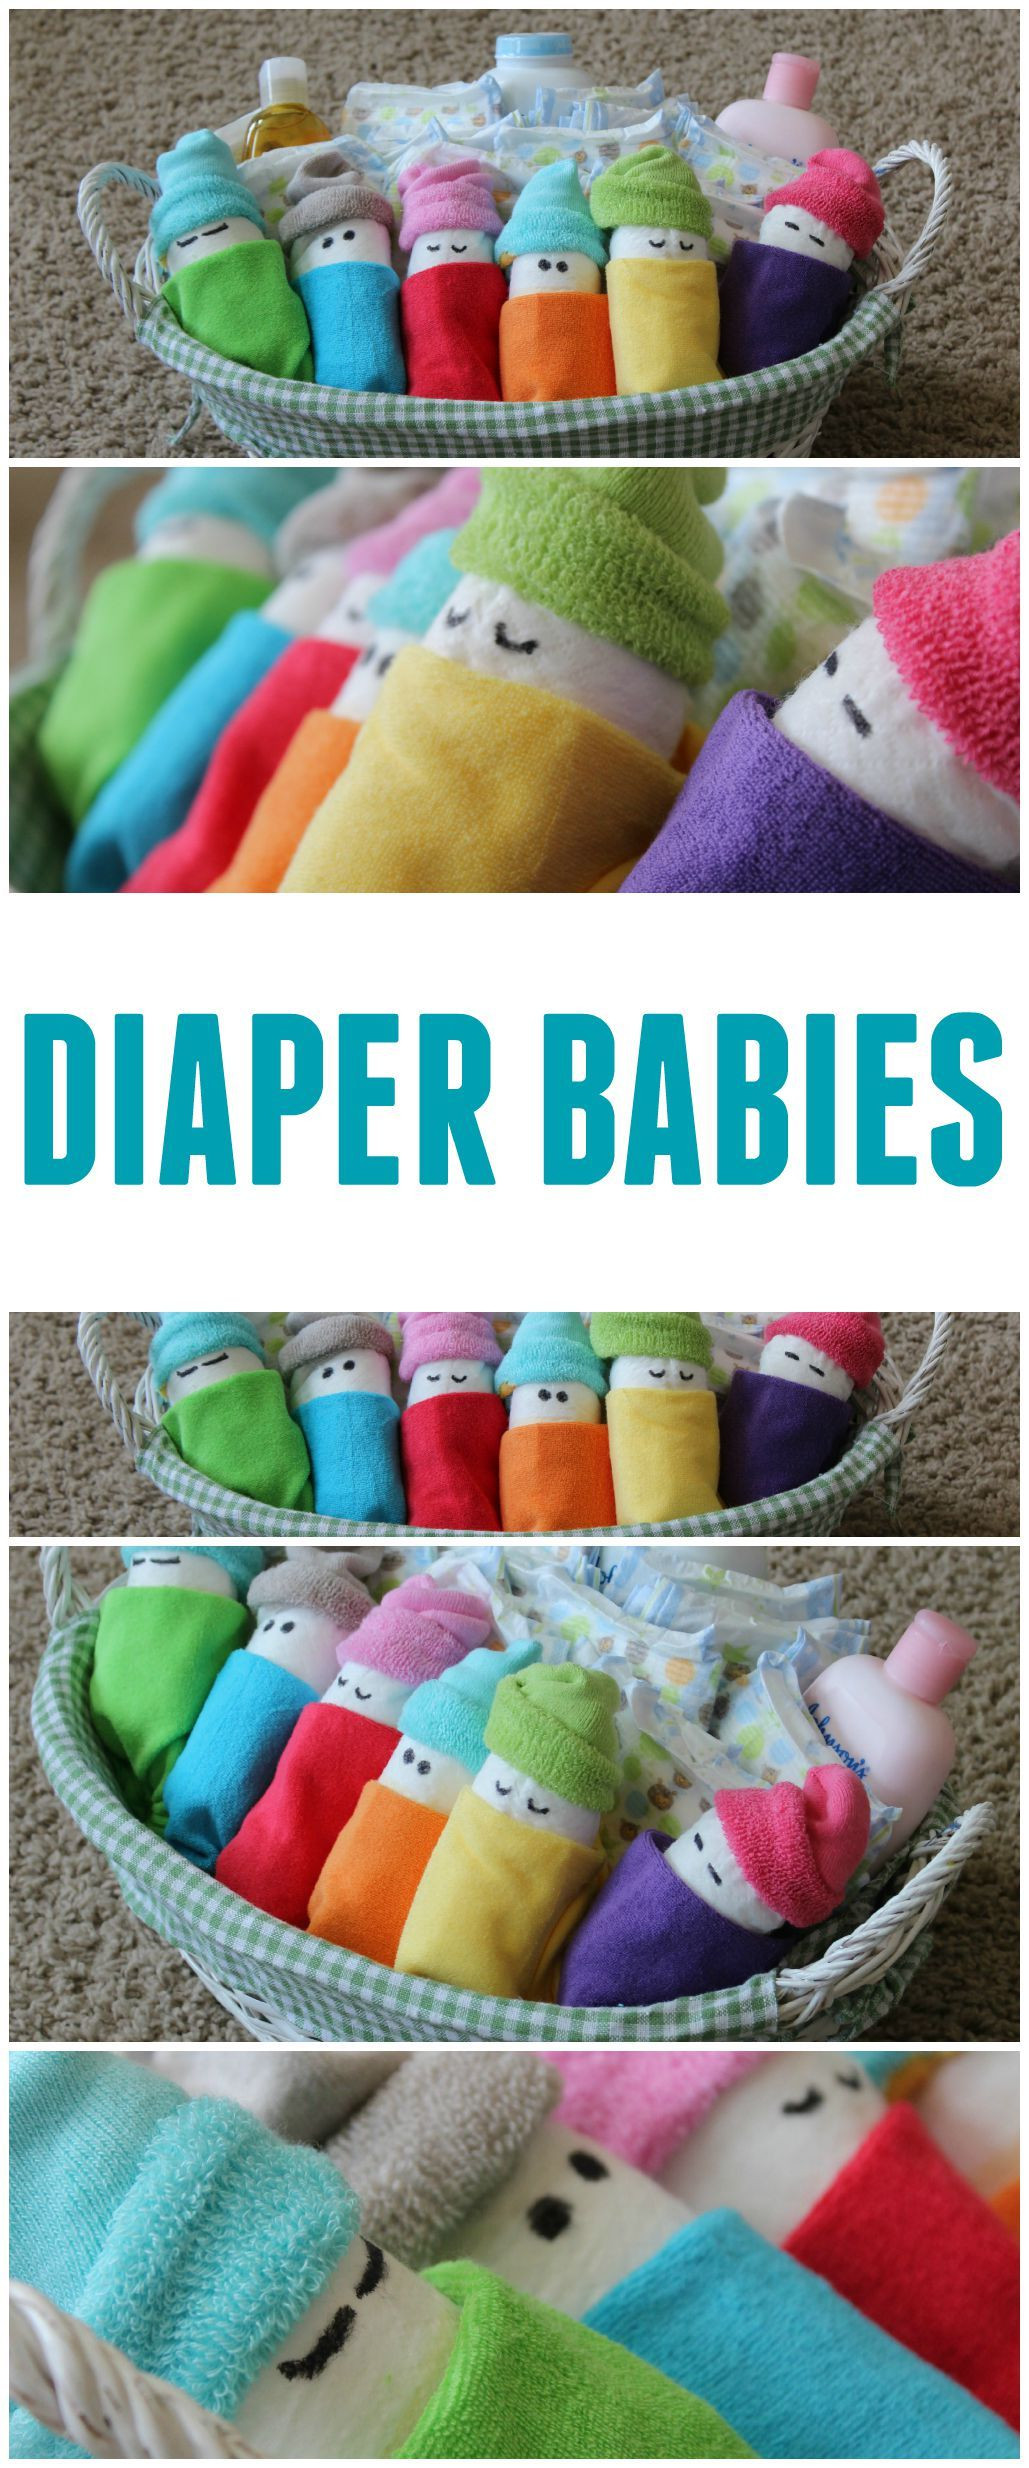 Diaper Gift Ideas For Baby Shower
 How To Make Diaper Babies Easy Baby Shower Gift Idea